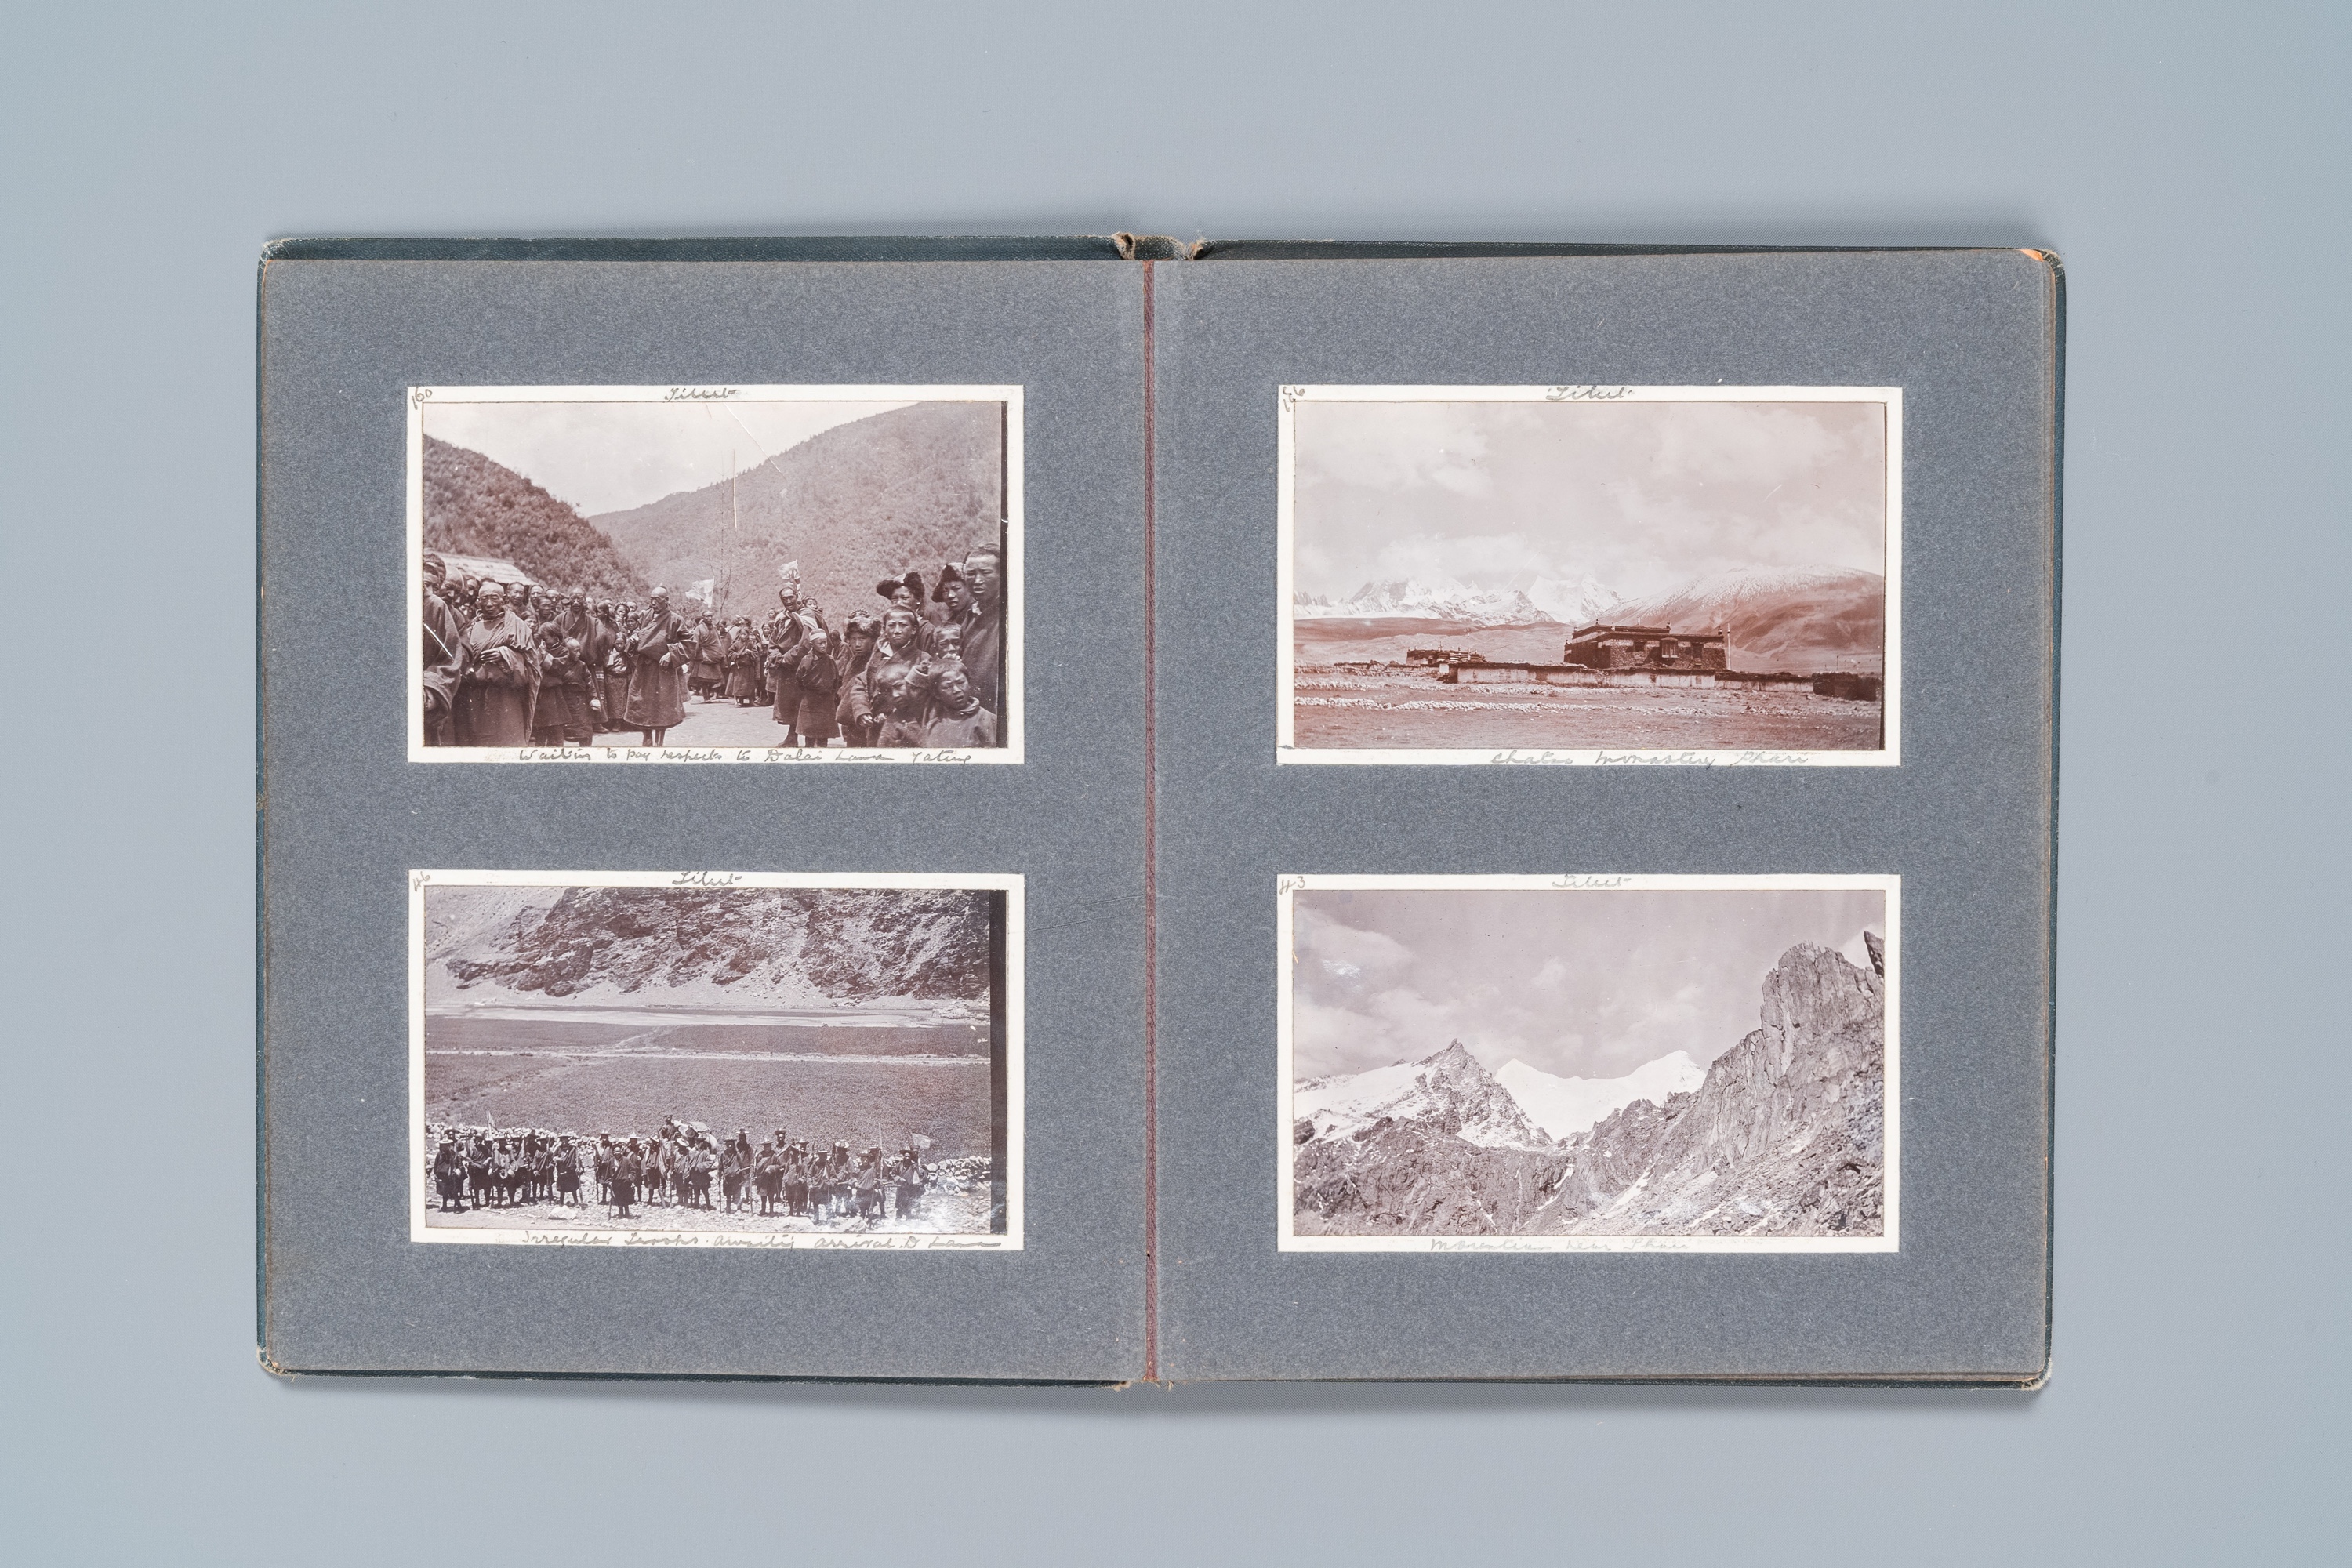 A rare photo album on the 13th Dalai Lama's return from exile from India, ca. 1912/1913 - Image 8 of 21